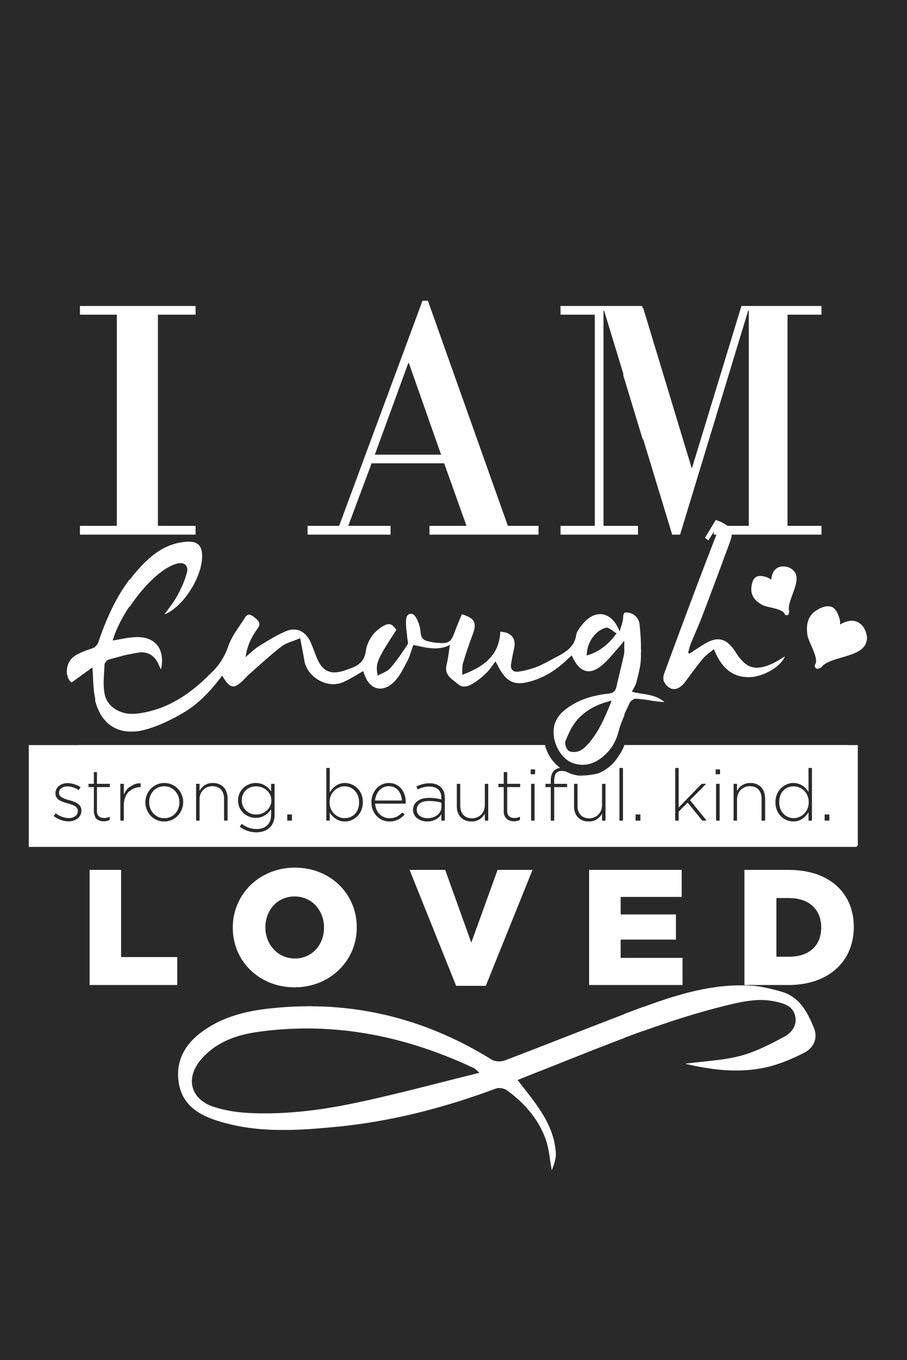 Download I Am Enough And Loved Wallpaper | Wallpapers.com